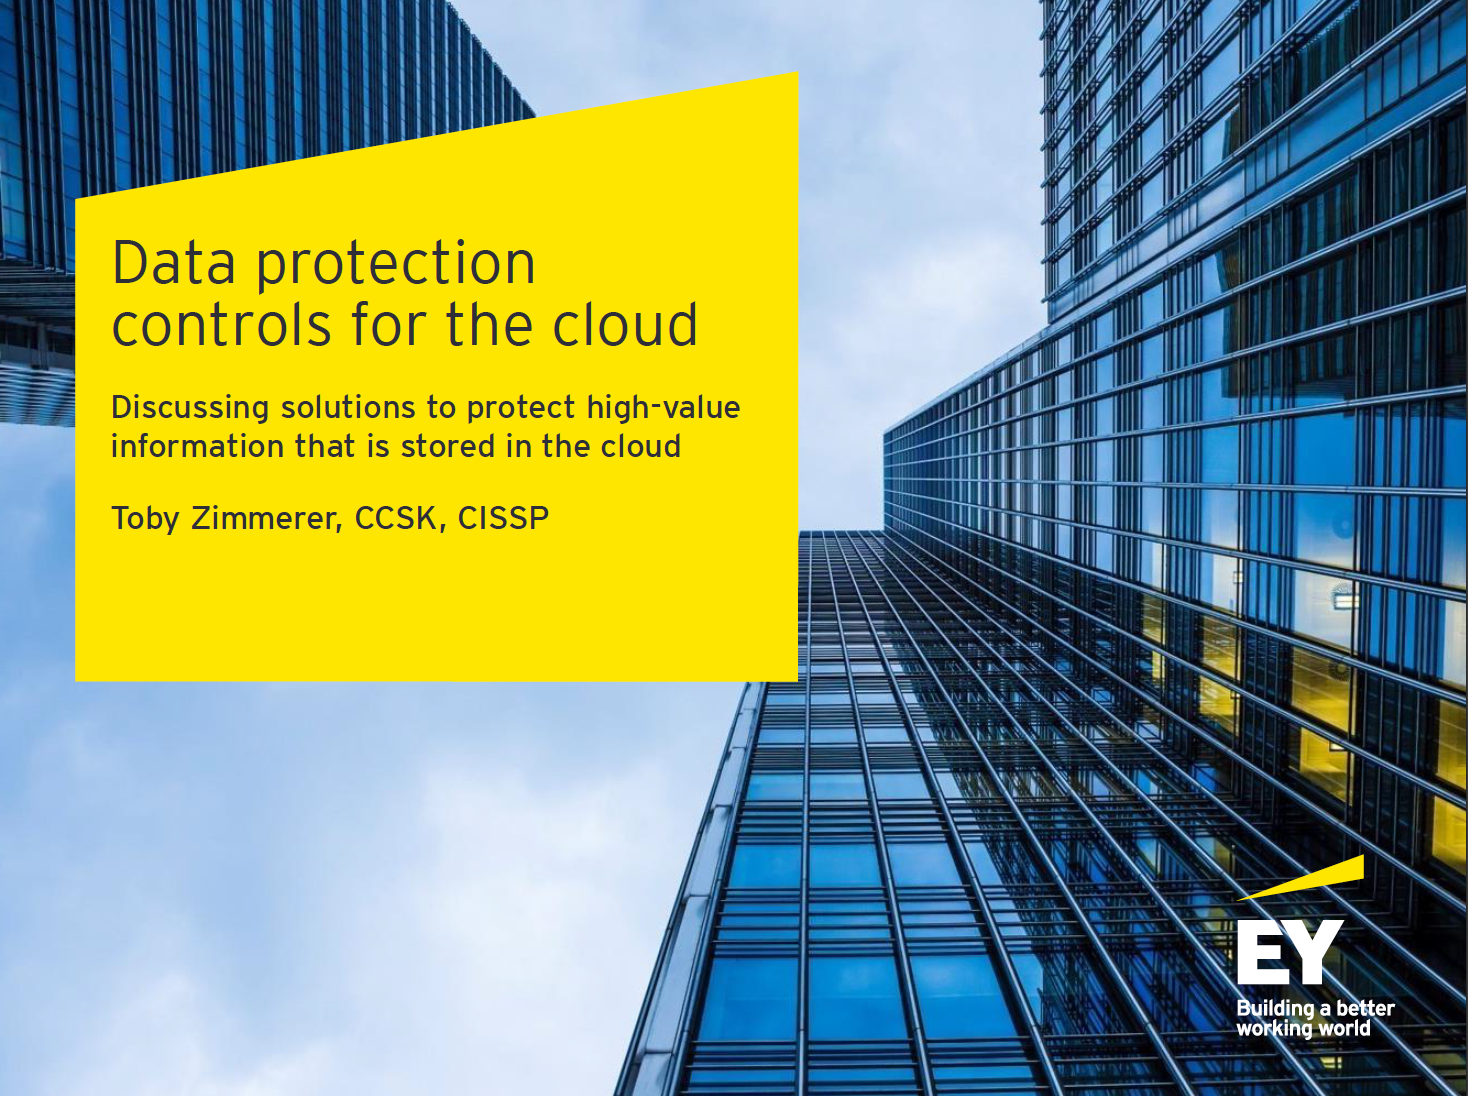 Data Protection Controls for the Cloud - Toby Zimmerer